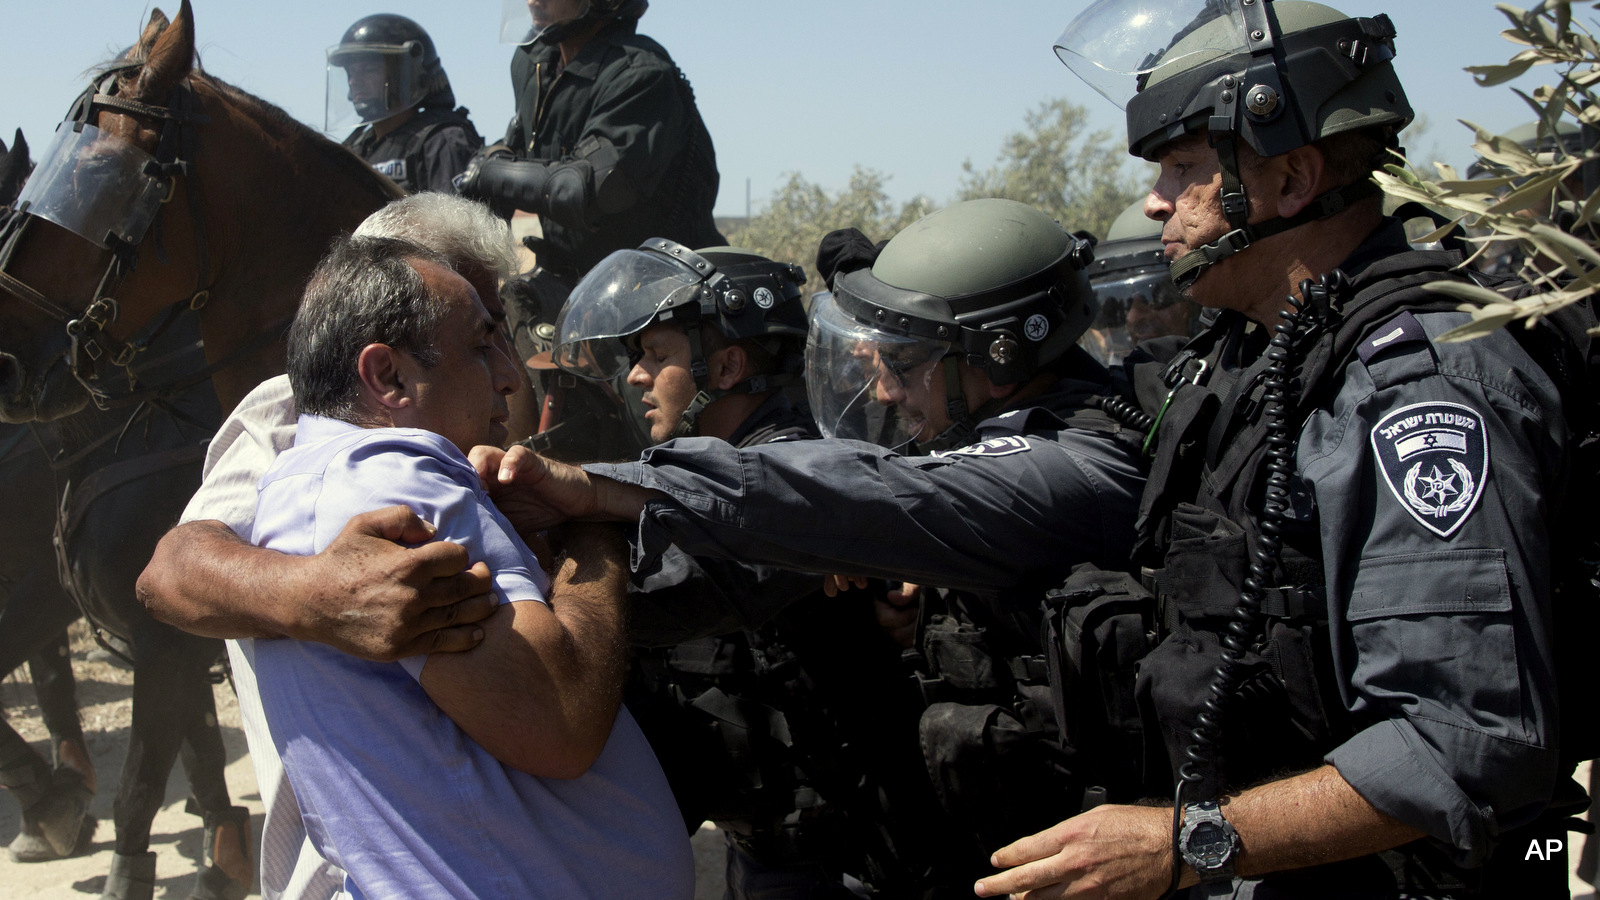 Israeli riot police officers scuffle with Arab men in Arab village of Ara, northern Israel, Monday, Sept. 19, 2016. About 50 right wing activists protested in Ara outside the home of Nashhat Milhem, who killed three people in a shooting rampage in Tel Aviv in January 2016 before police killed him in a shootout. The demonstrators demanded Israel deport Milhem's family and shouted "There is no Palestine." They arrived under heavy police escort to the village, where locals held a counterdemonstration.